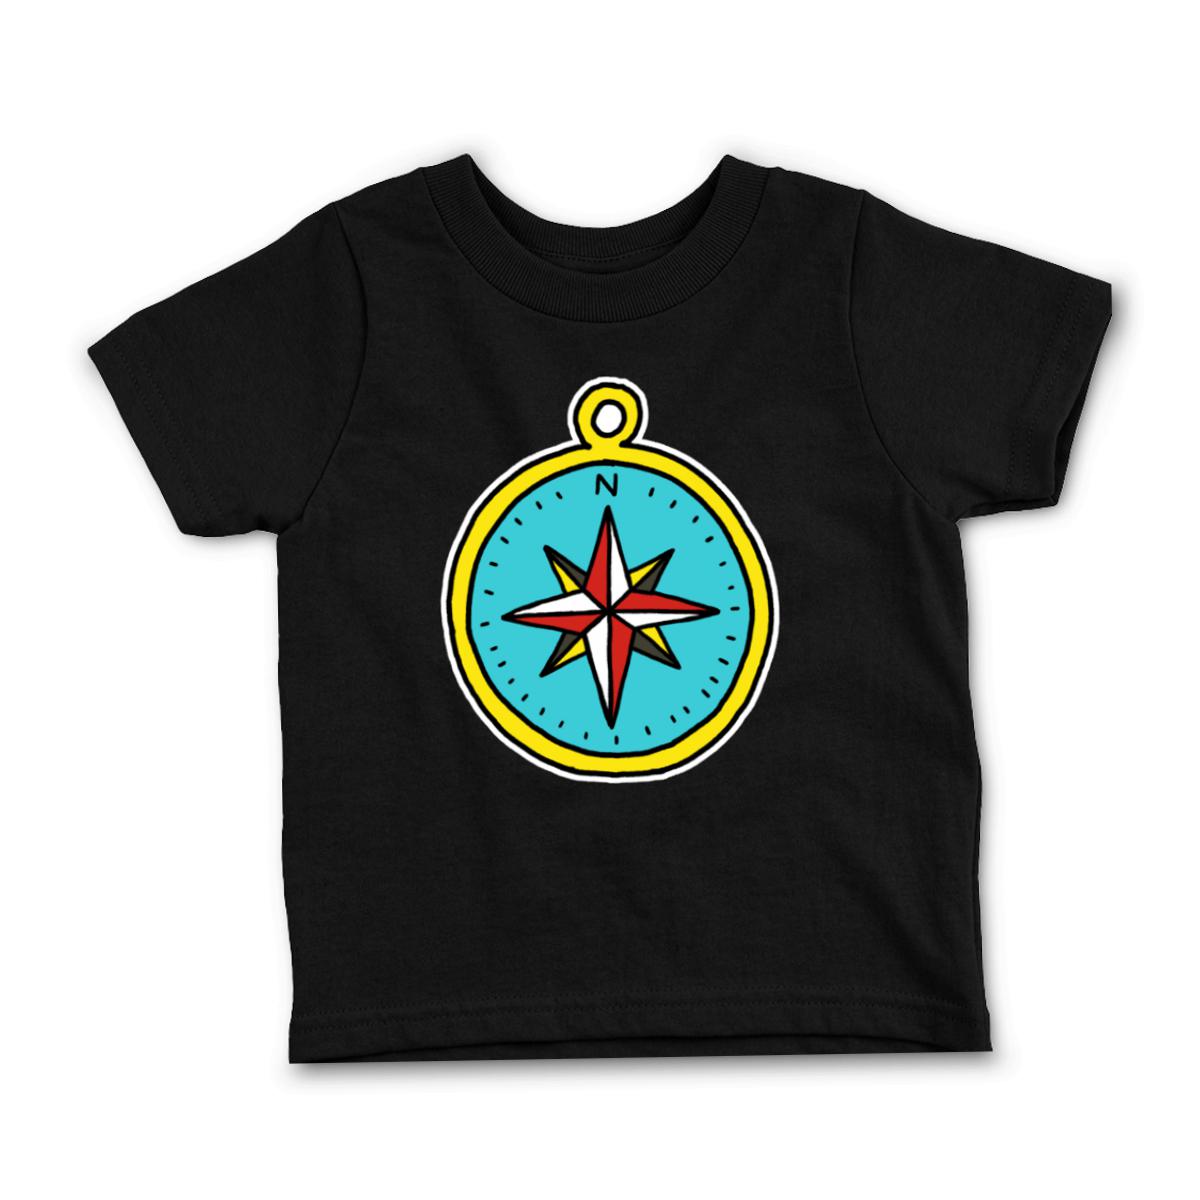 American Traditional Compass Toddler Tee 2T black